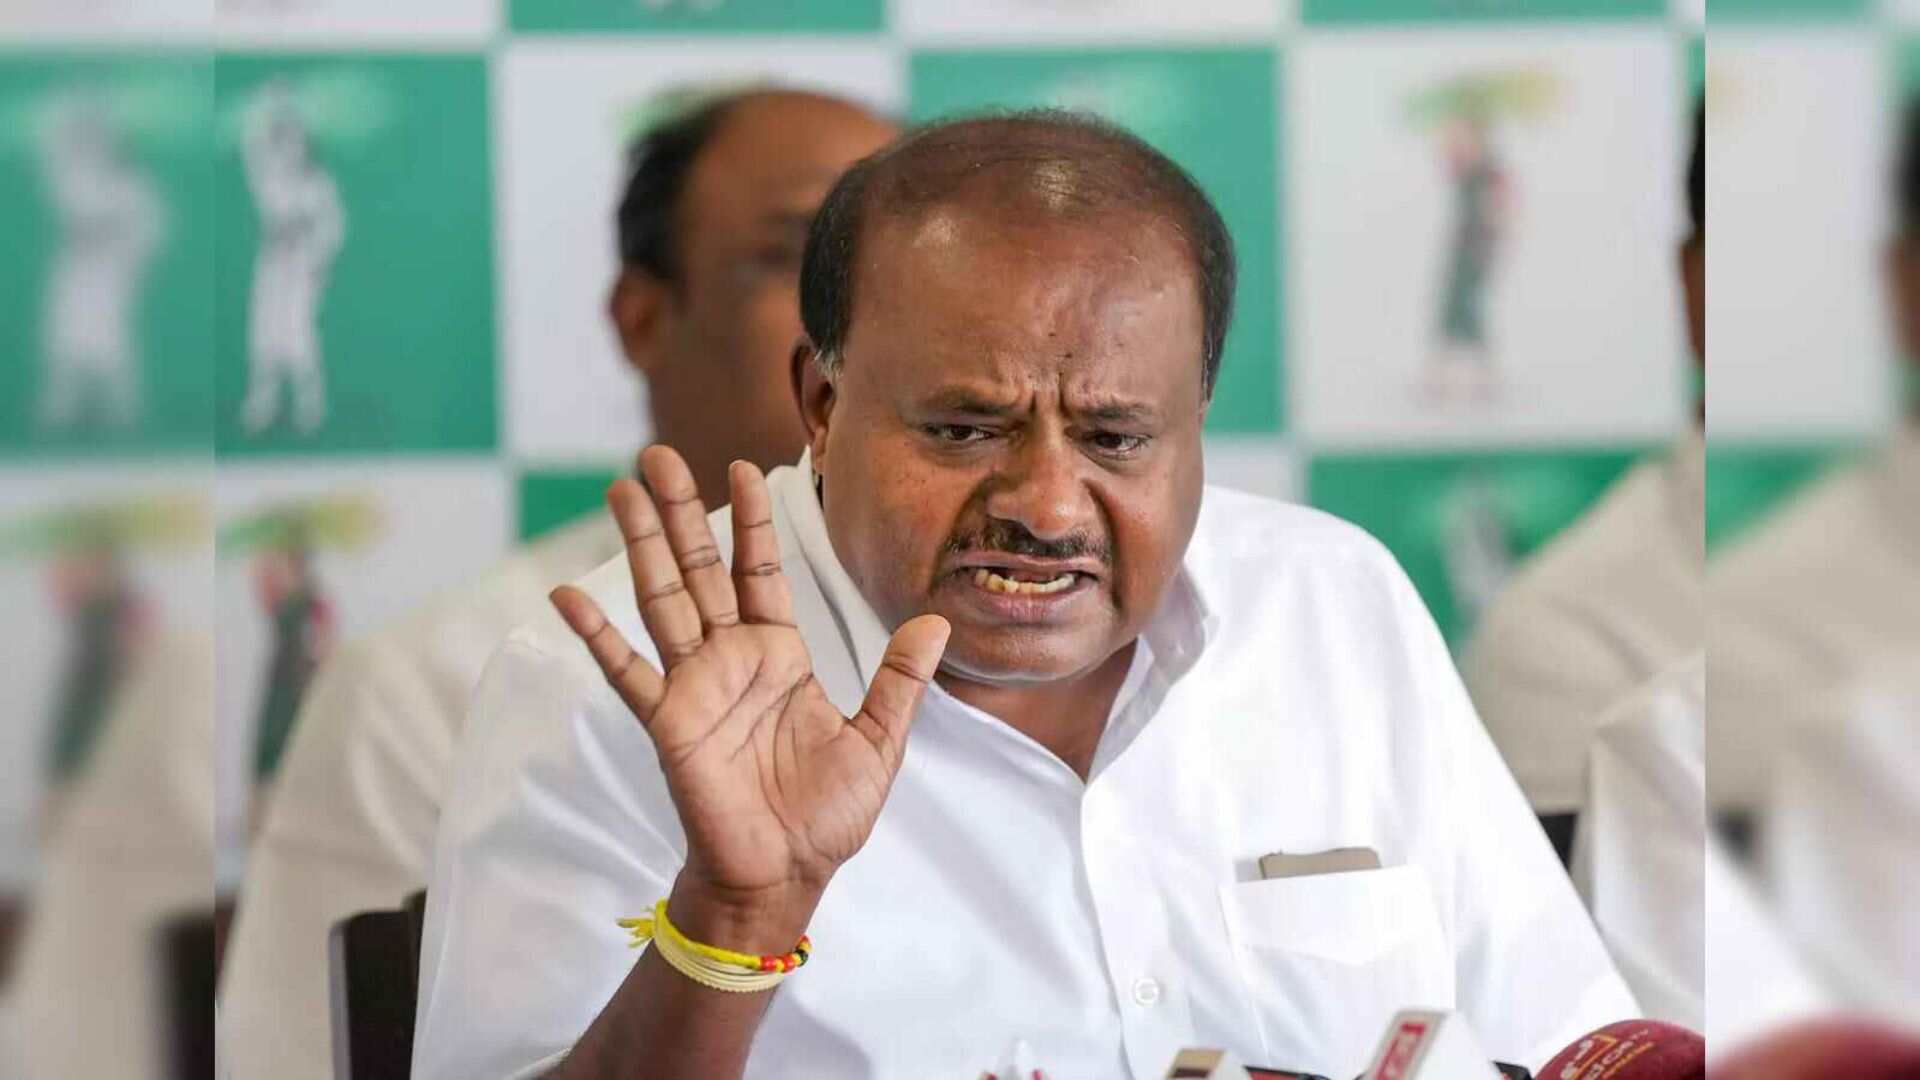 Kumaraswamy emphasized that neither his party nor his family was responsible for Revanna's actions.